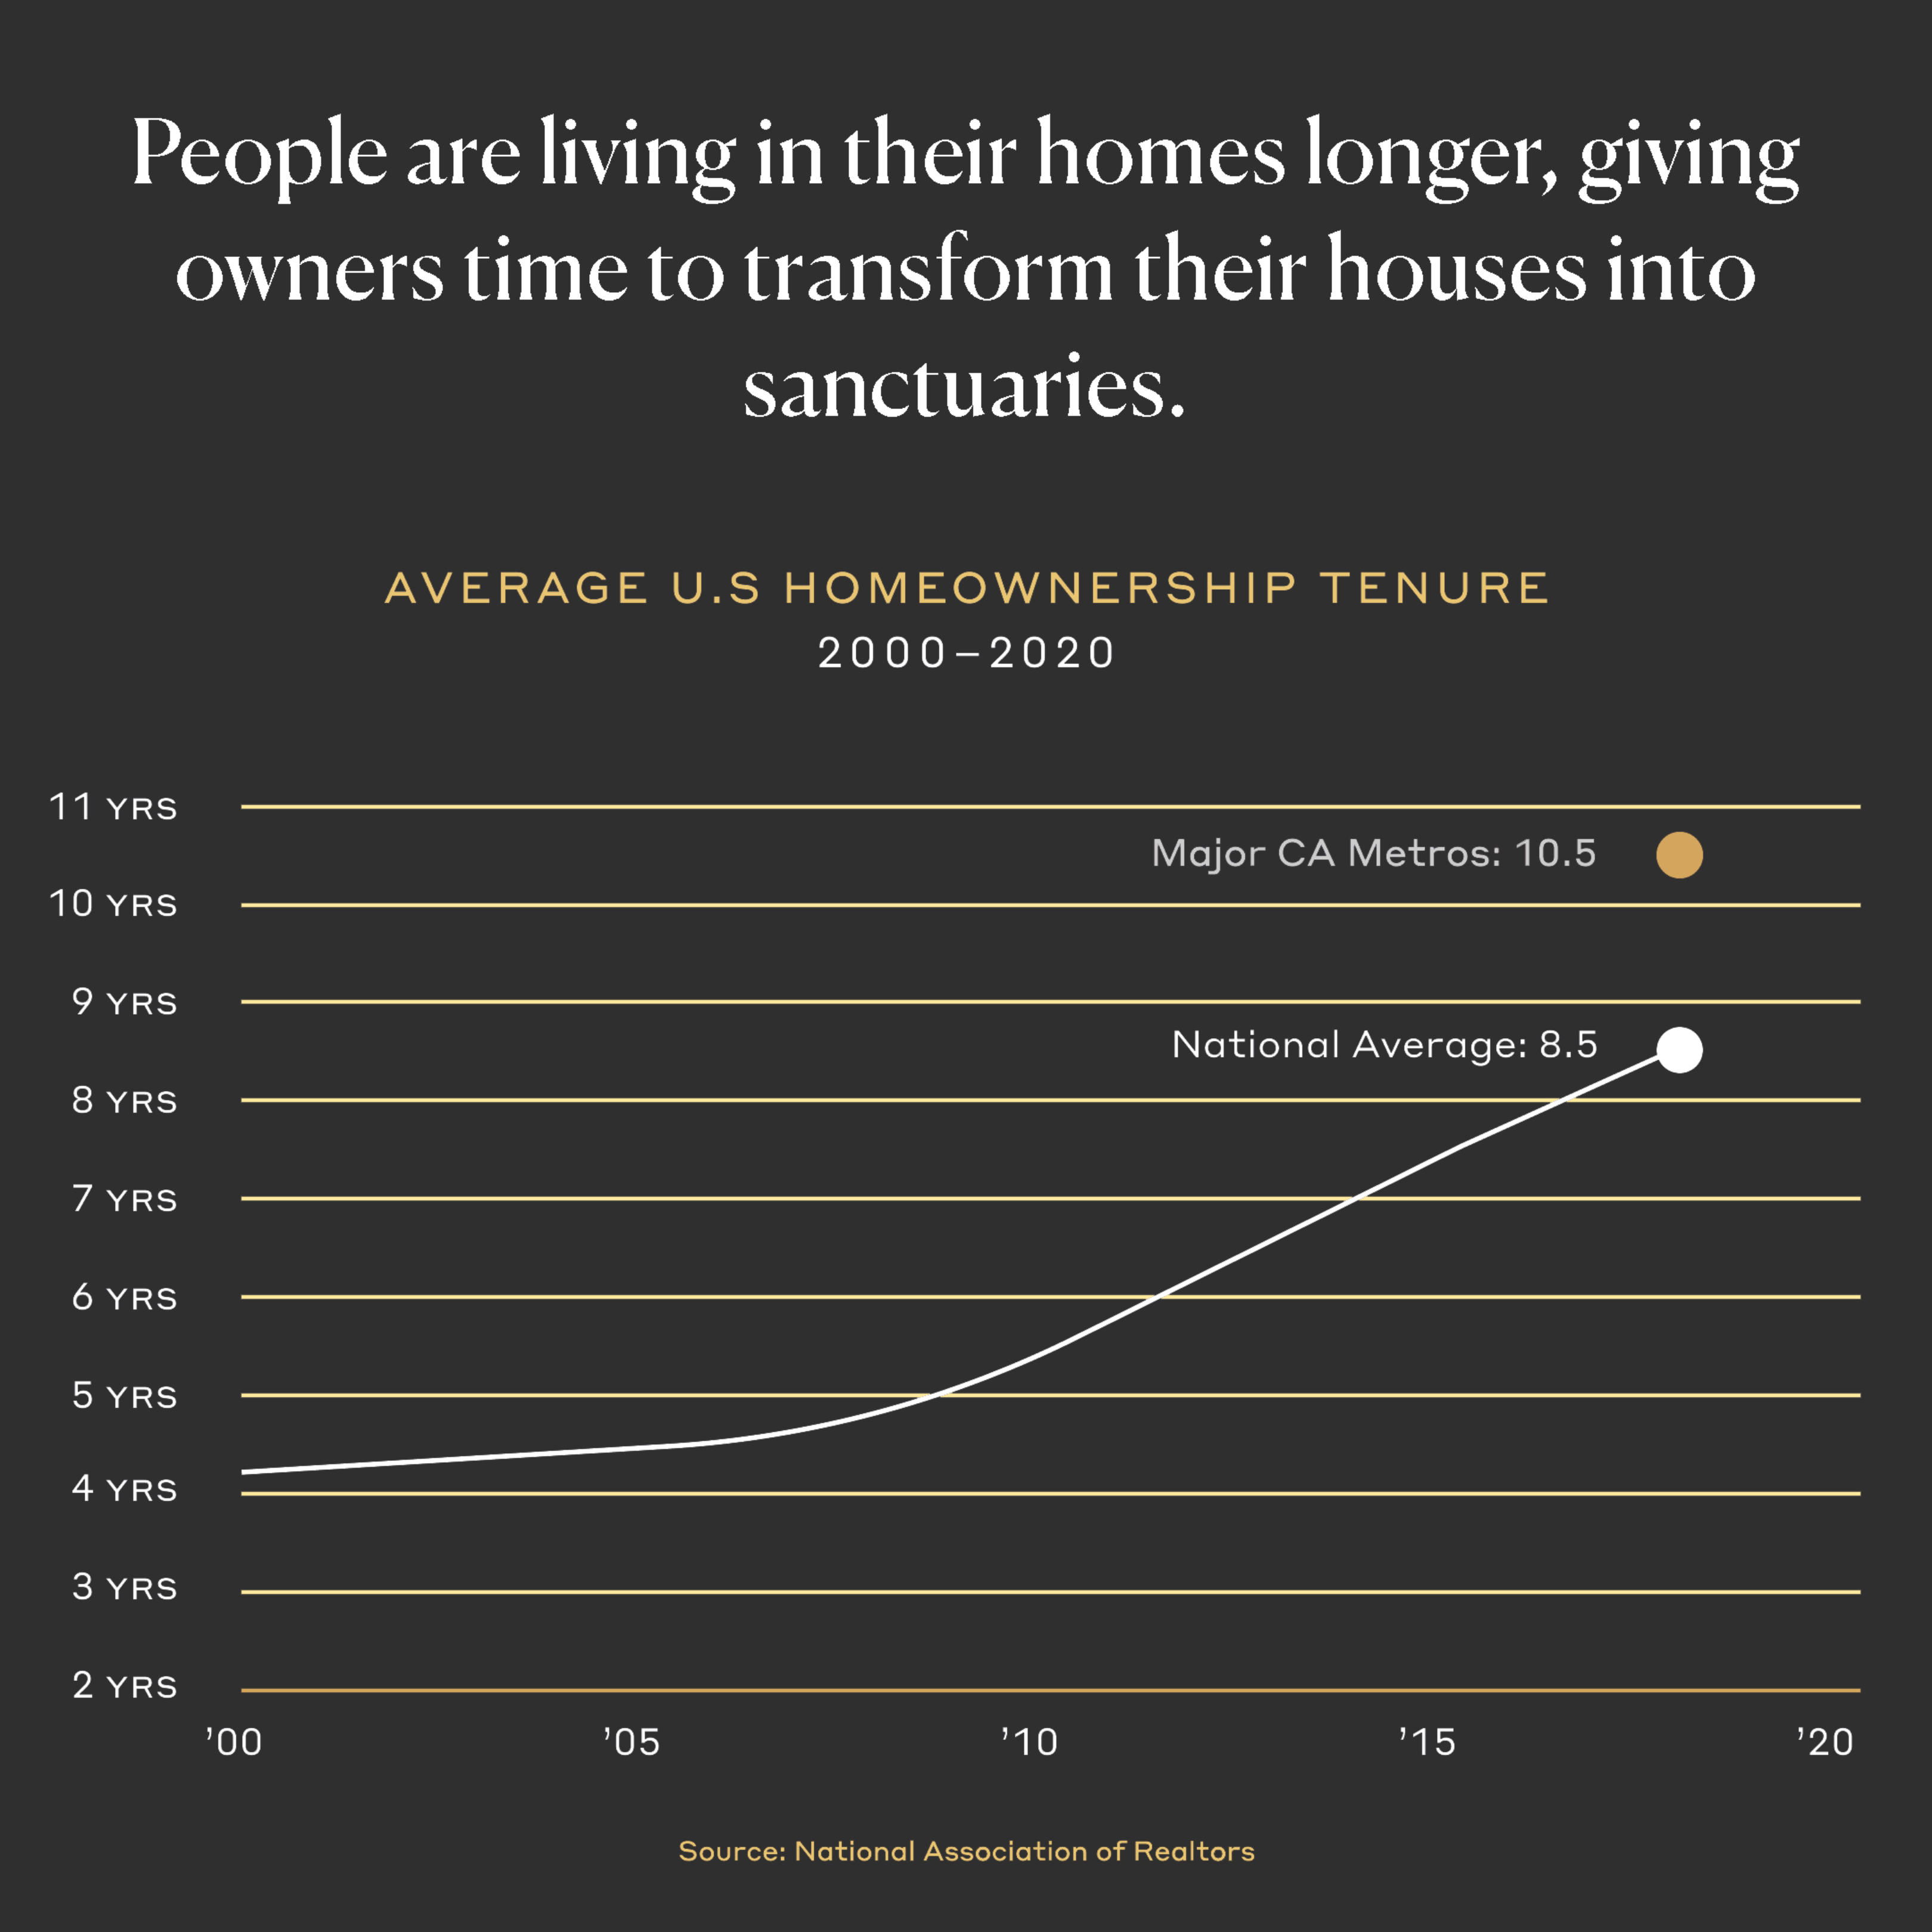 People are living in their homes longer, giving owners time to transform their houses into sanctuaries.